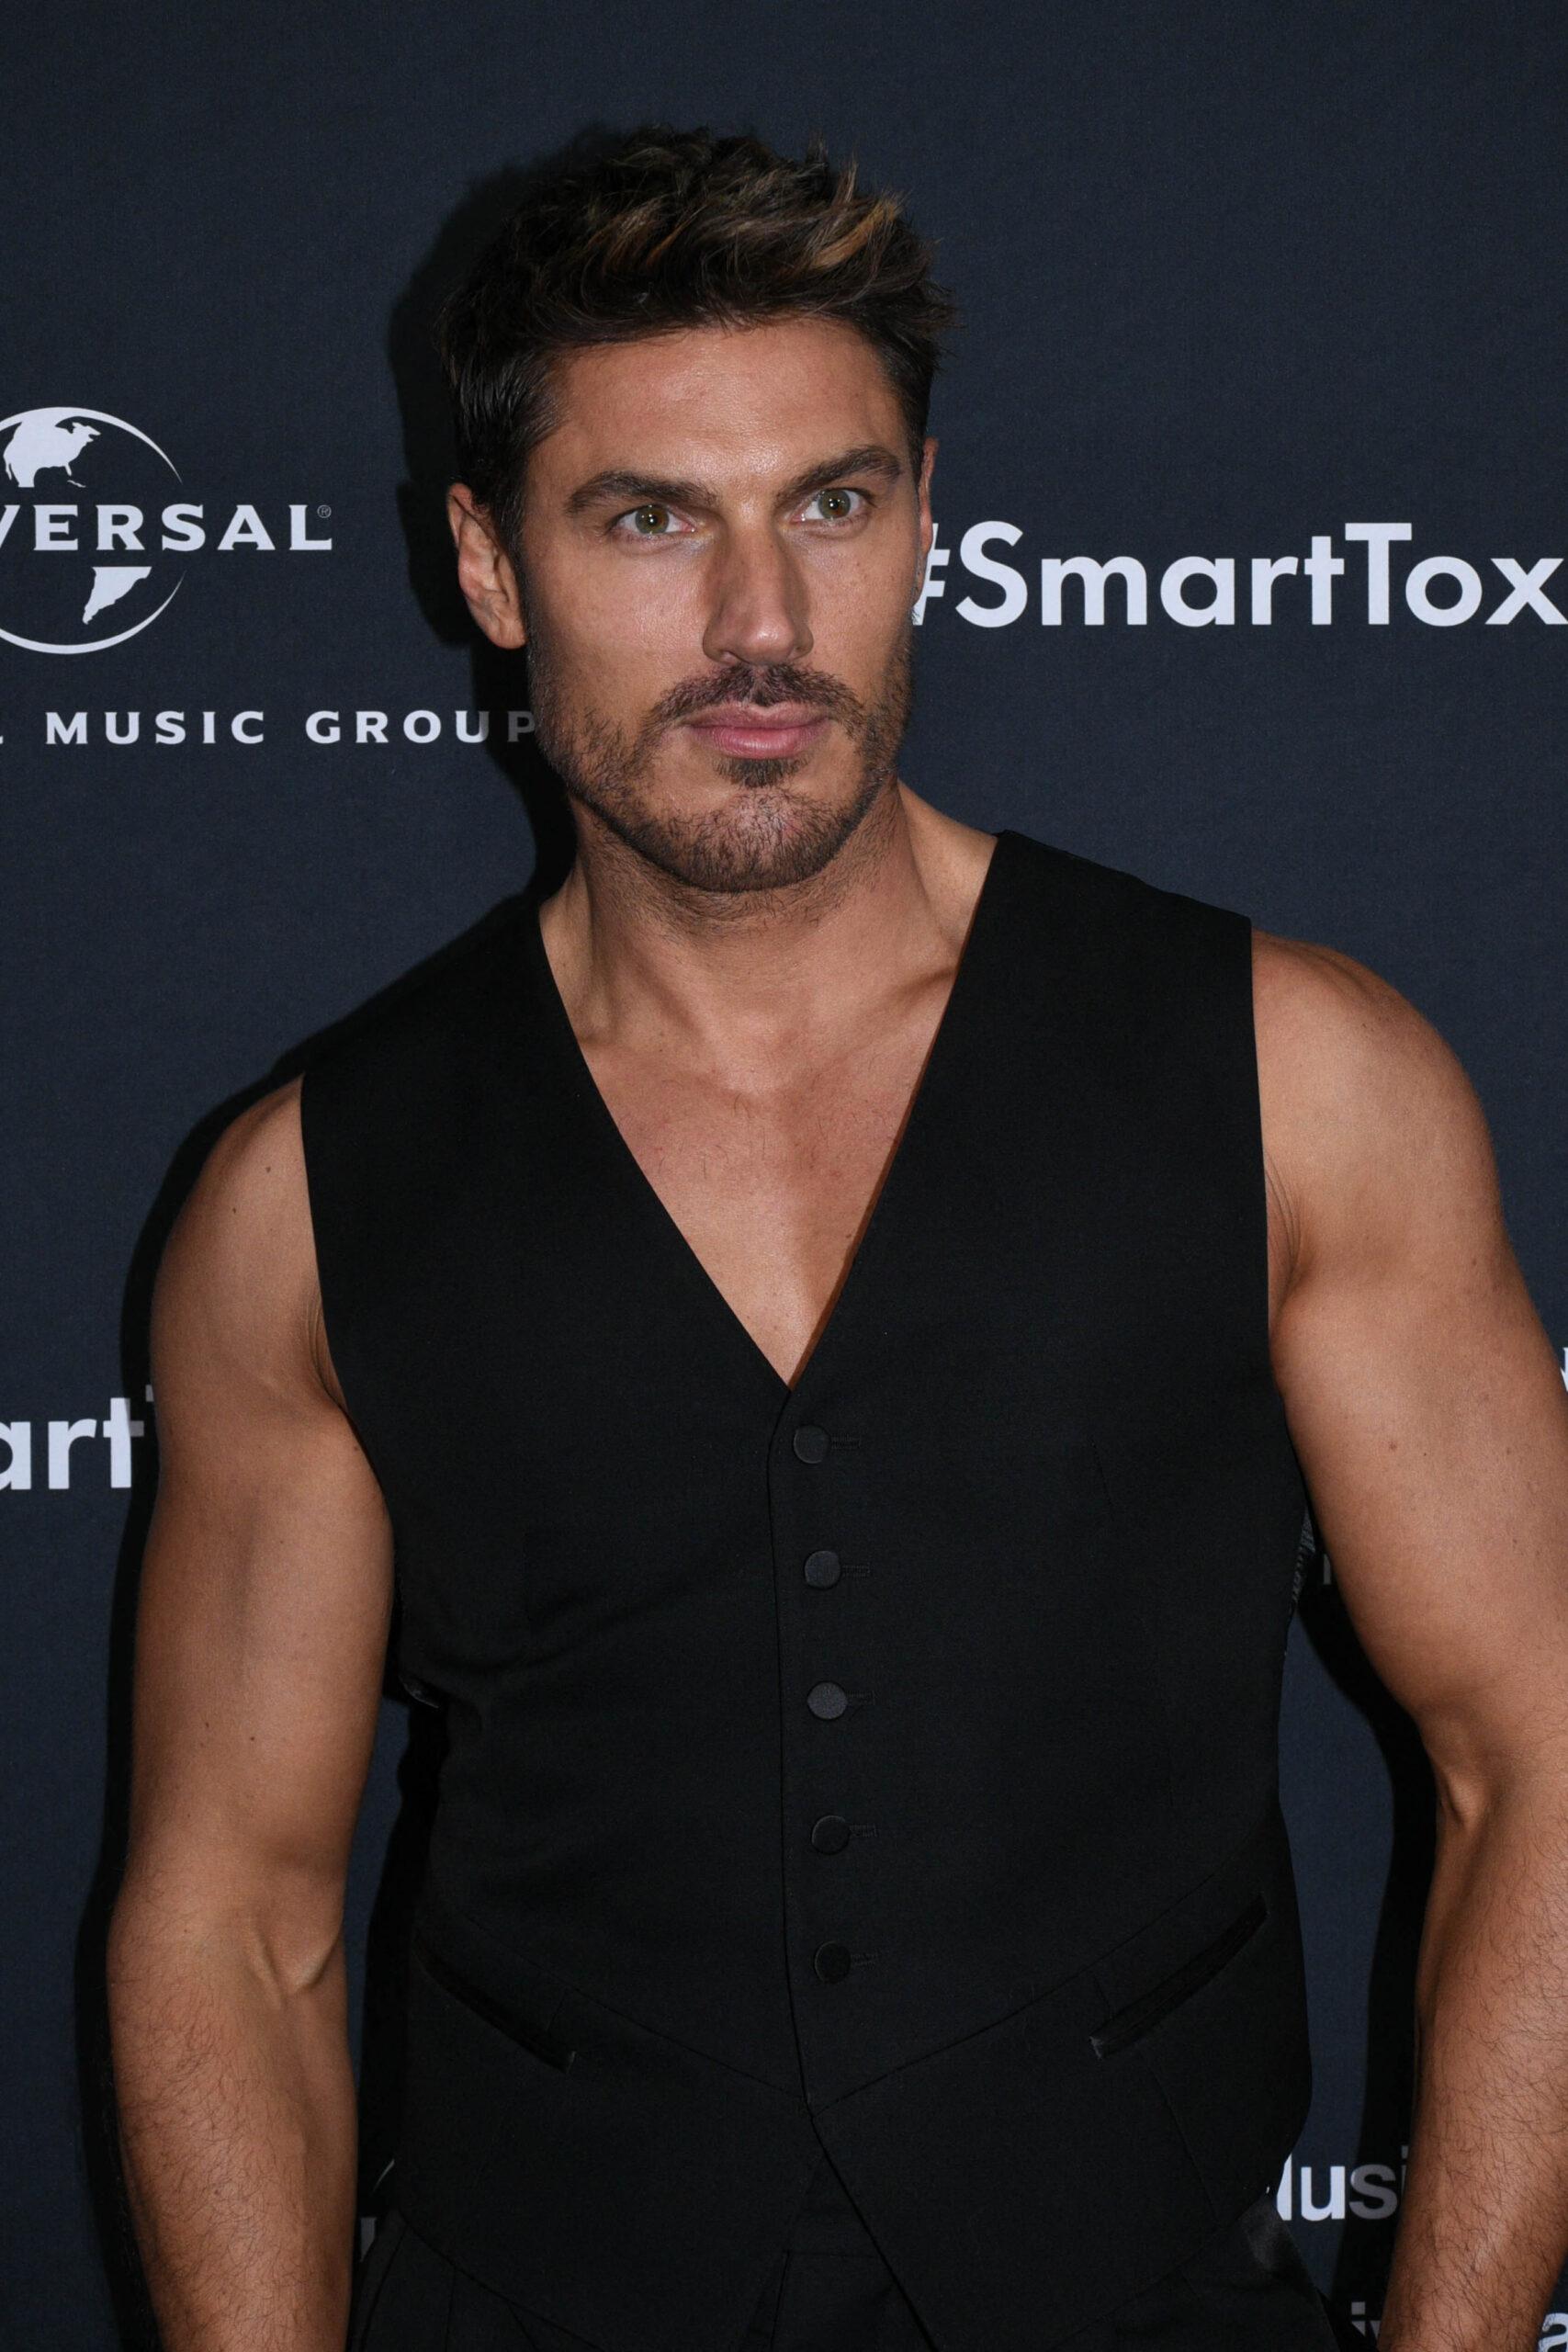 Chris Appleton poses on the red carpet at Universal Music Group's GRAMMY After Party